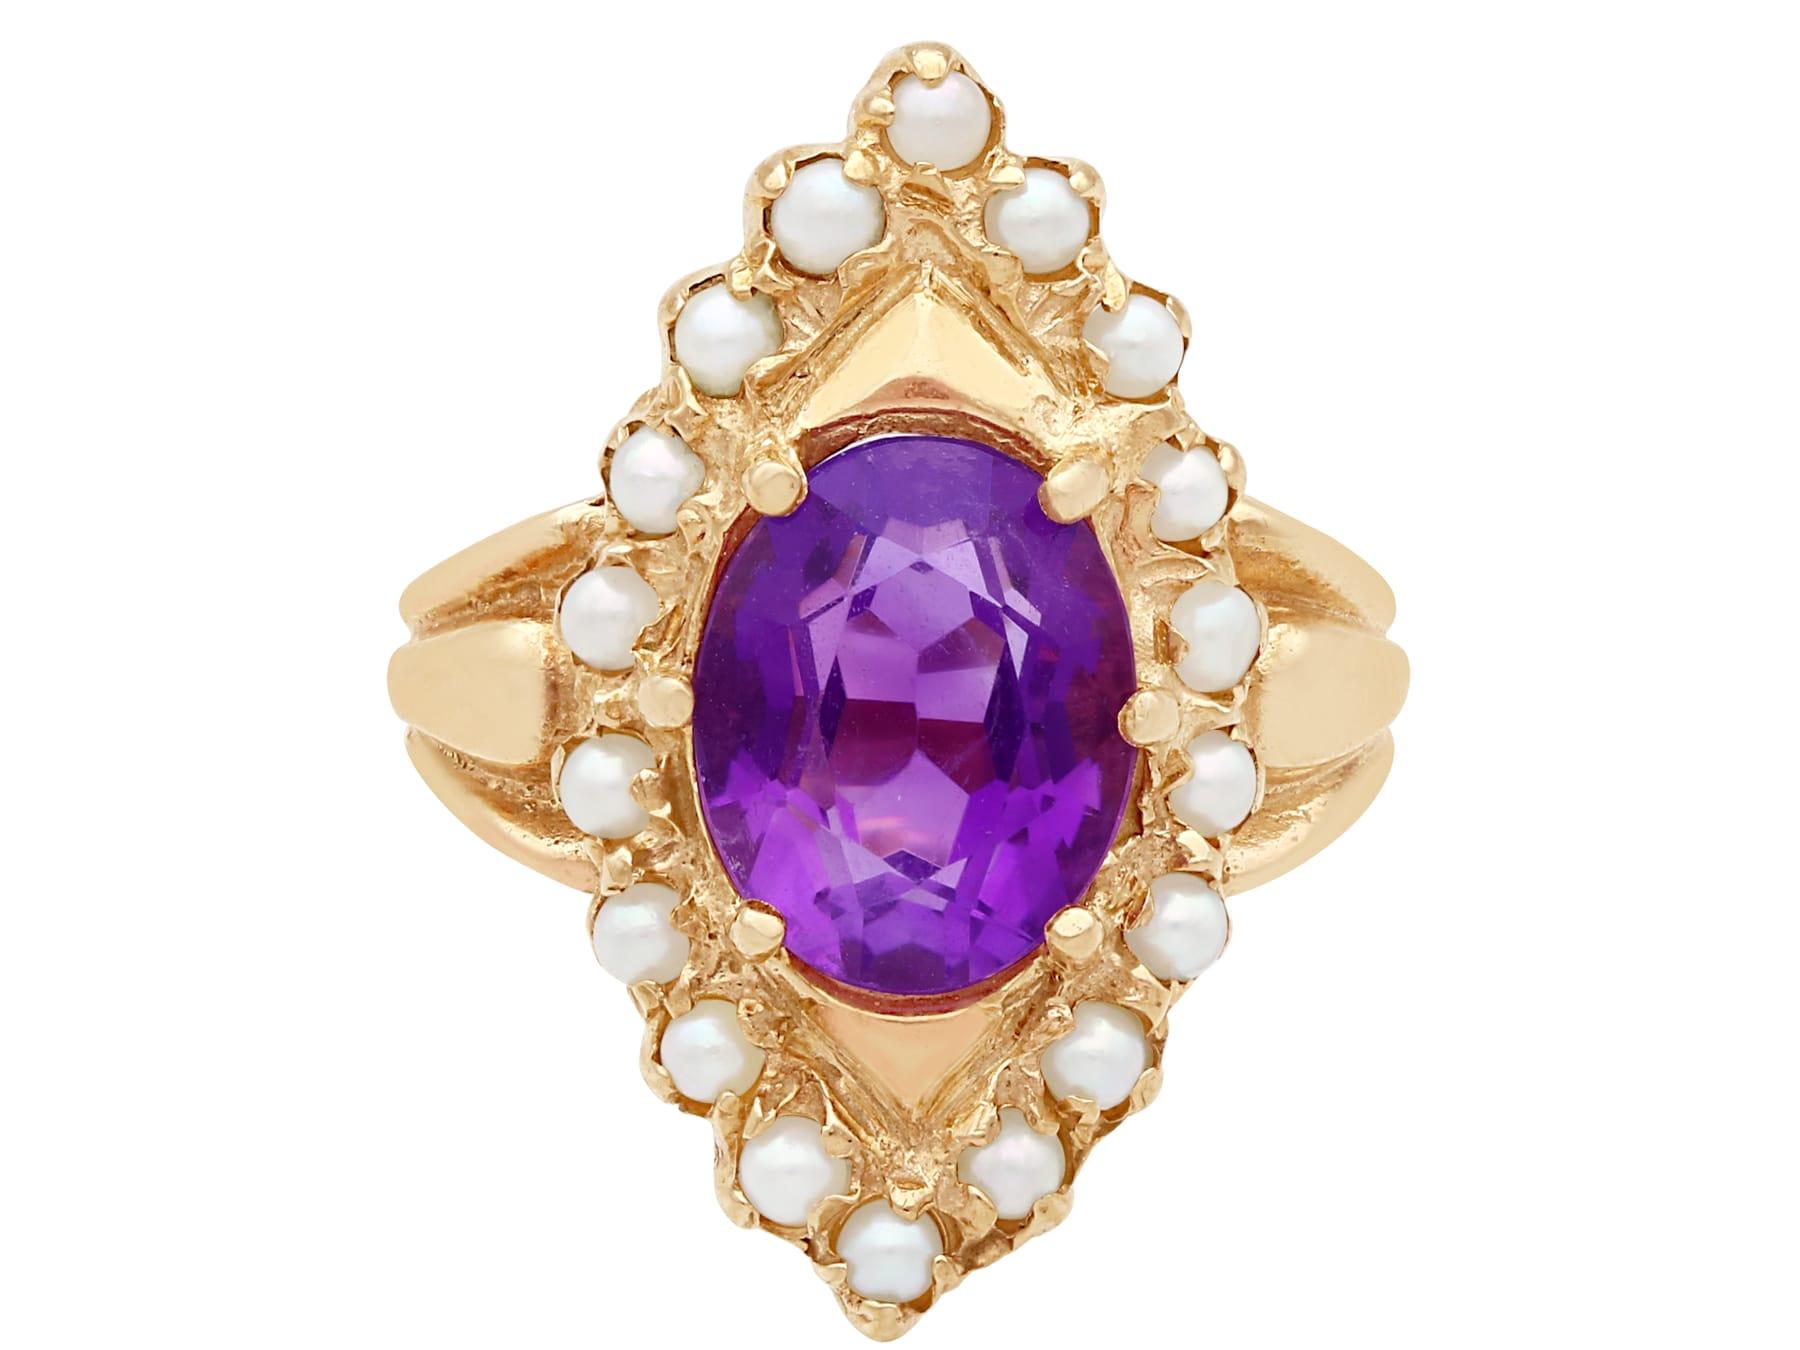 Women's 1970s, 2.51 Carat Amethyst and Seed Pearl Yellow Gold Cocktail Ring For Sale